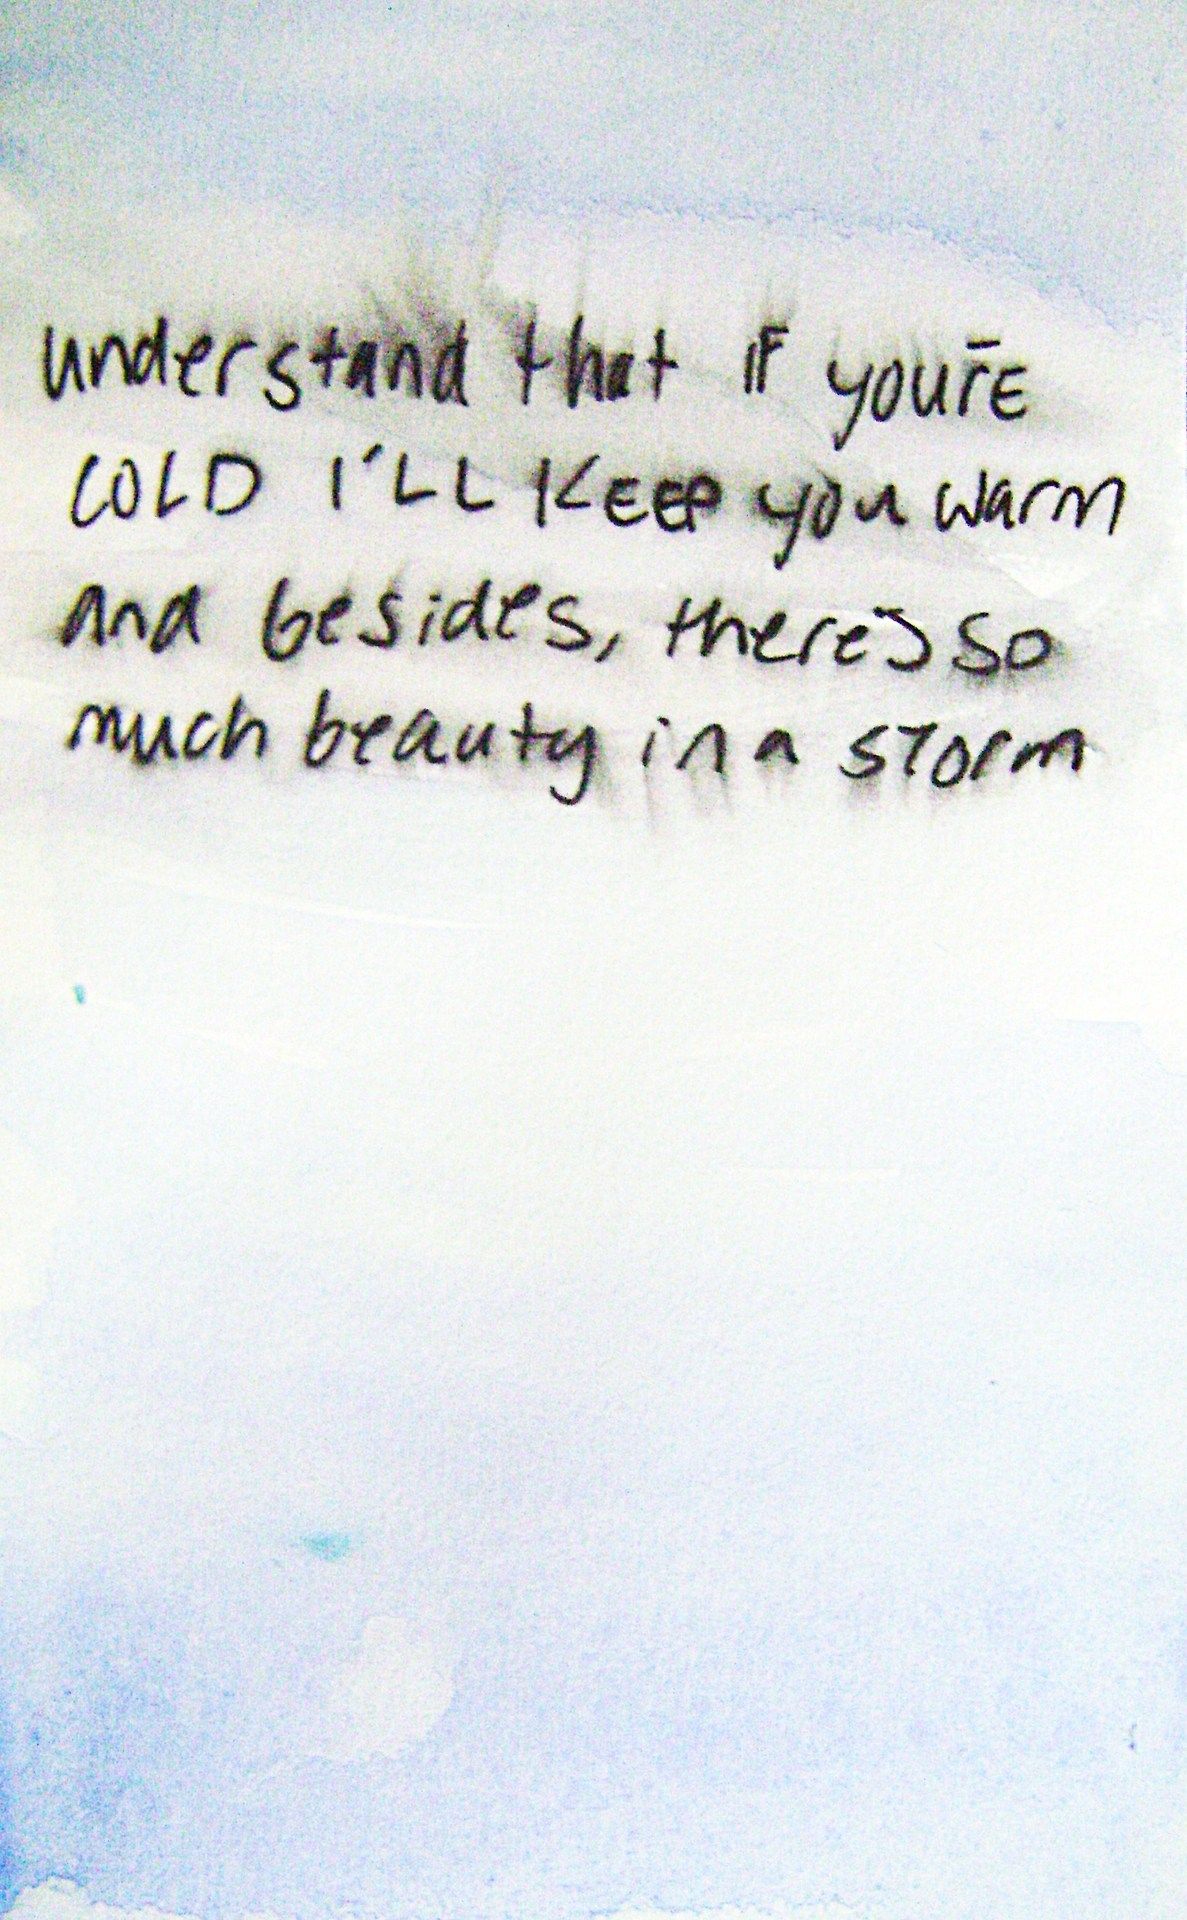 So much beauty in a storm. #love #quotes #quote #writing #text #words #beauty #s